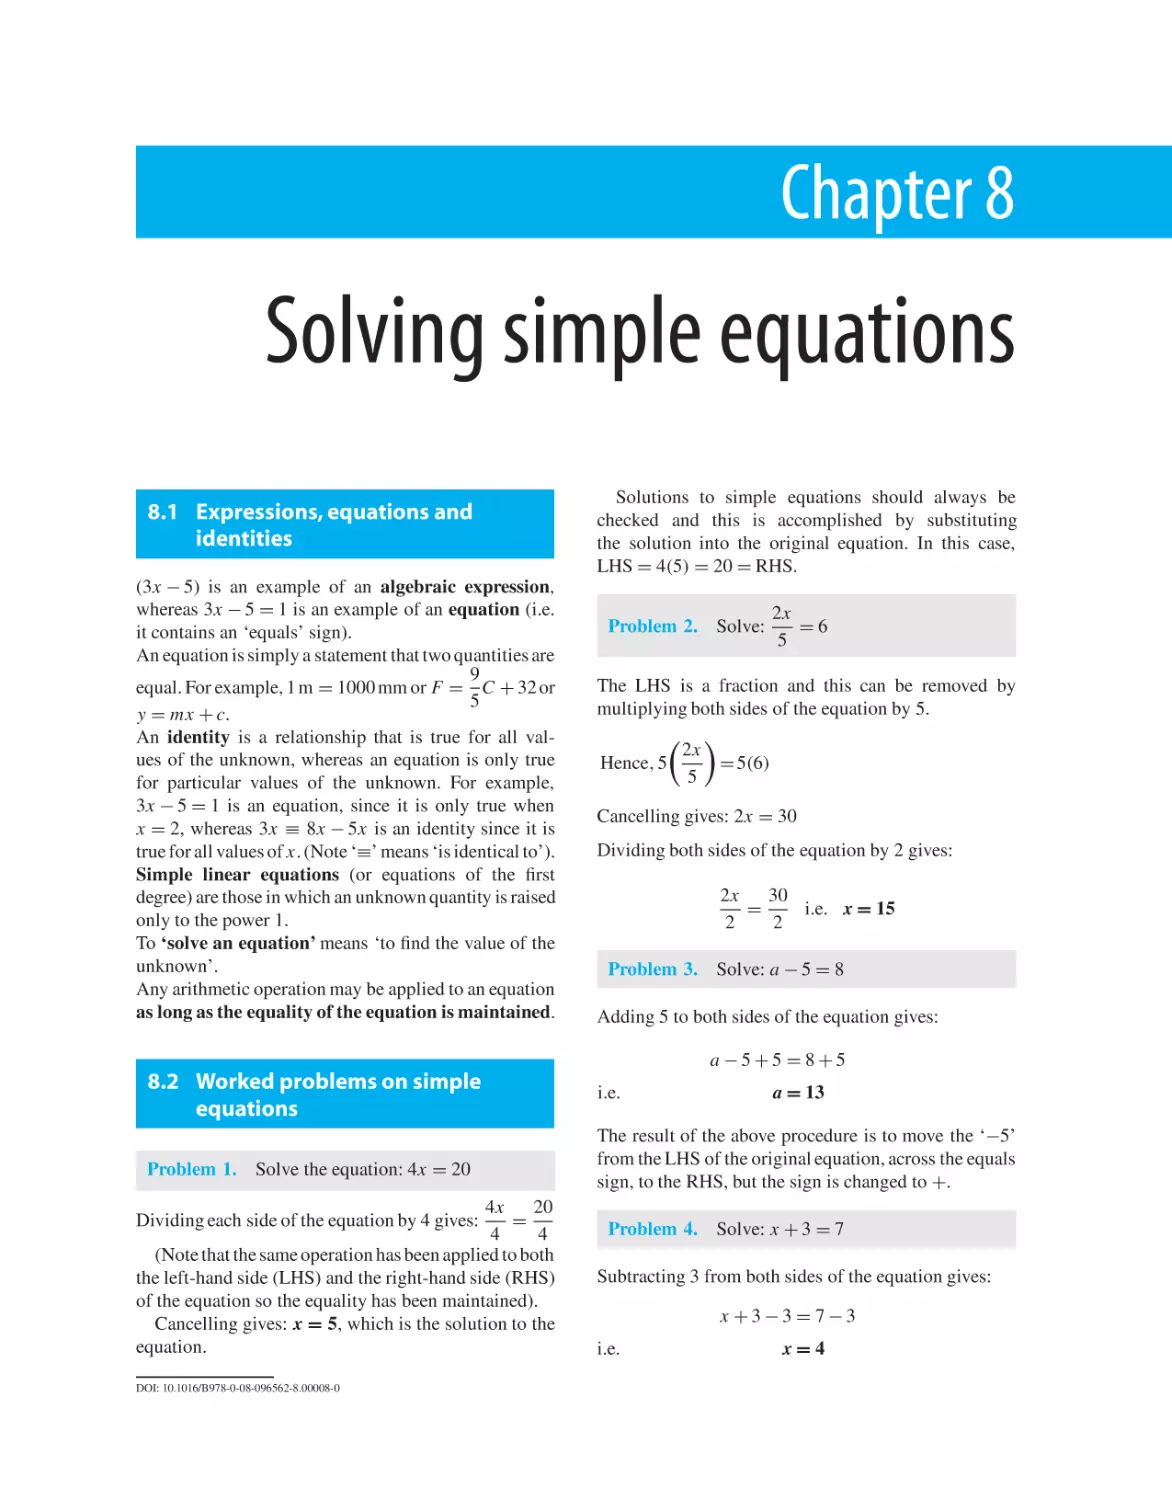 Chapter 8. Solving simple equations
8.1 Expressions, equations and identities
8.2 Worked problems on simple equations